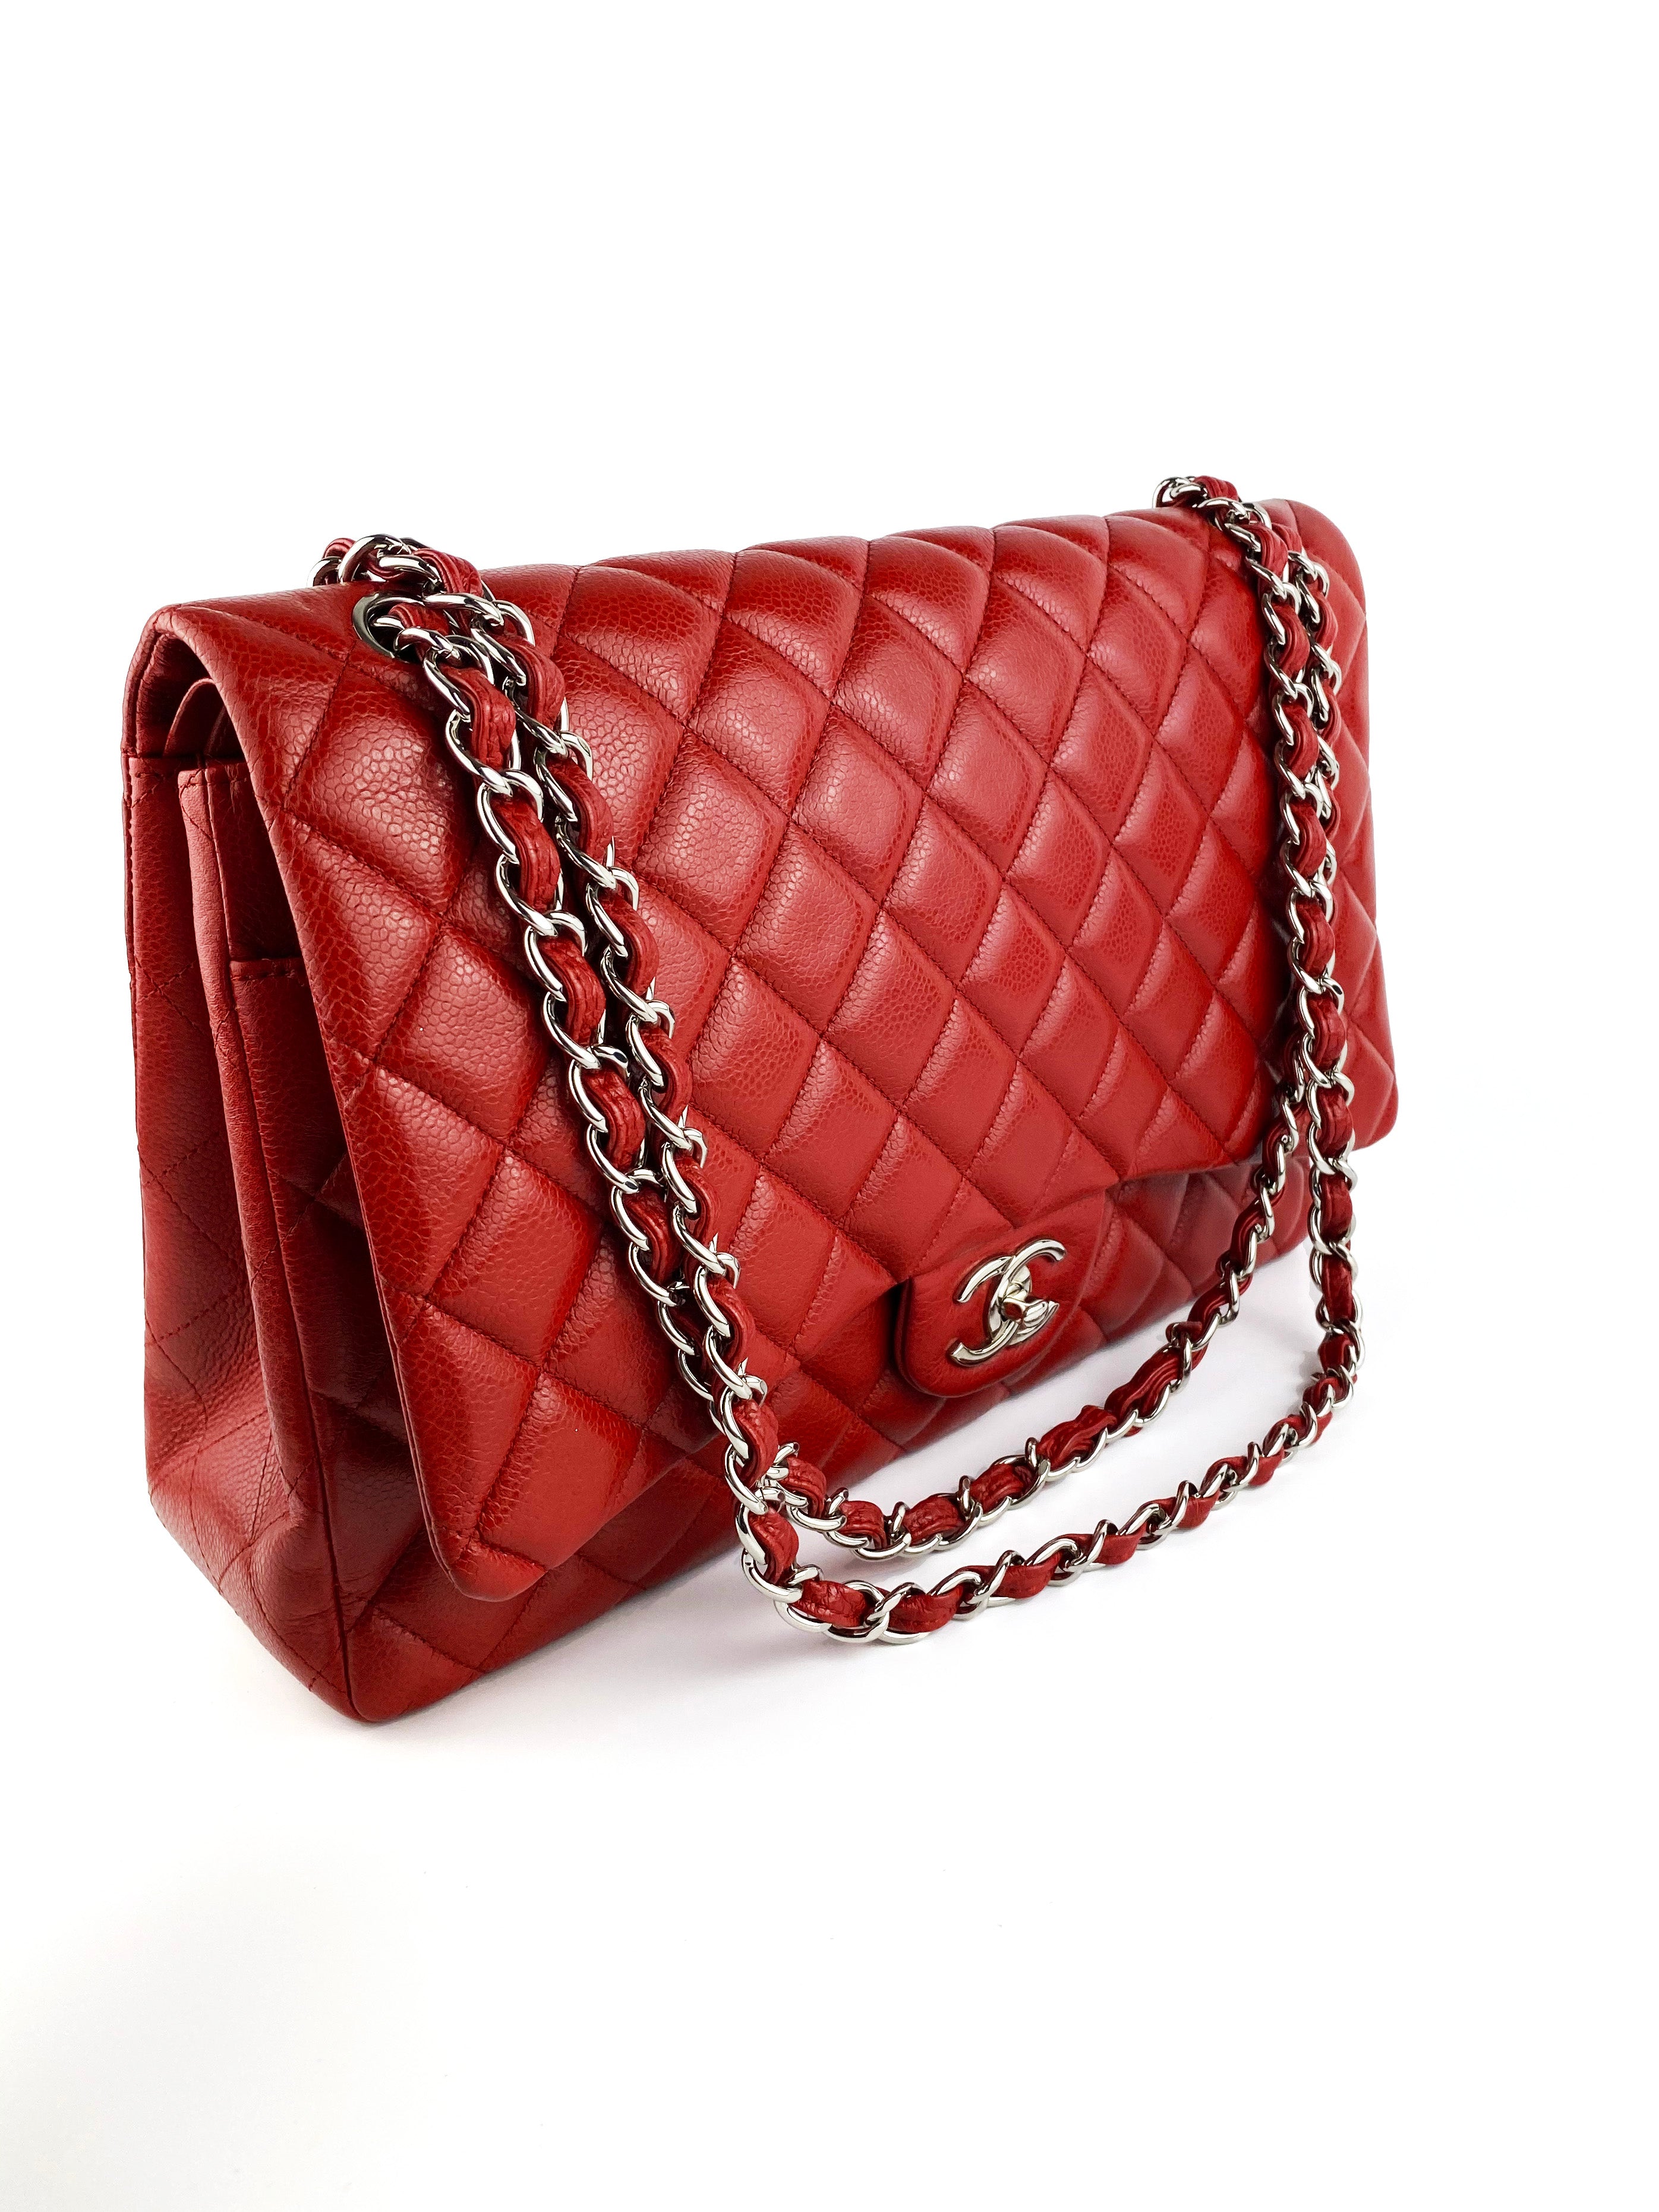 Chanel Red Maxi Classic Flap Bag